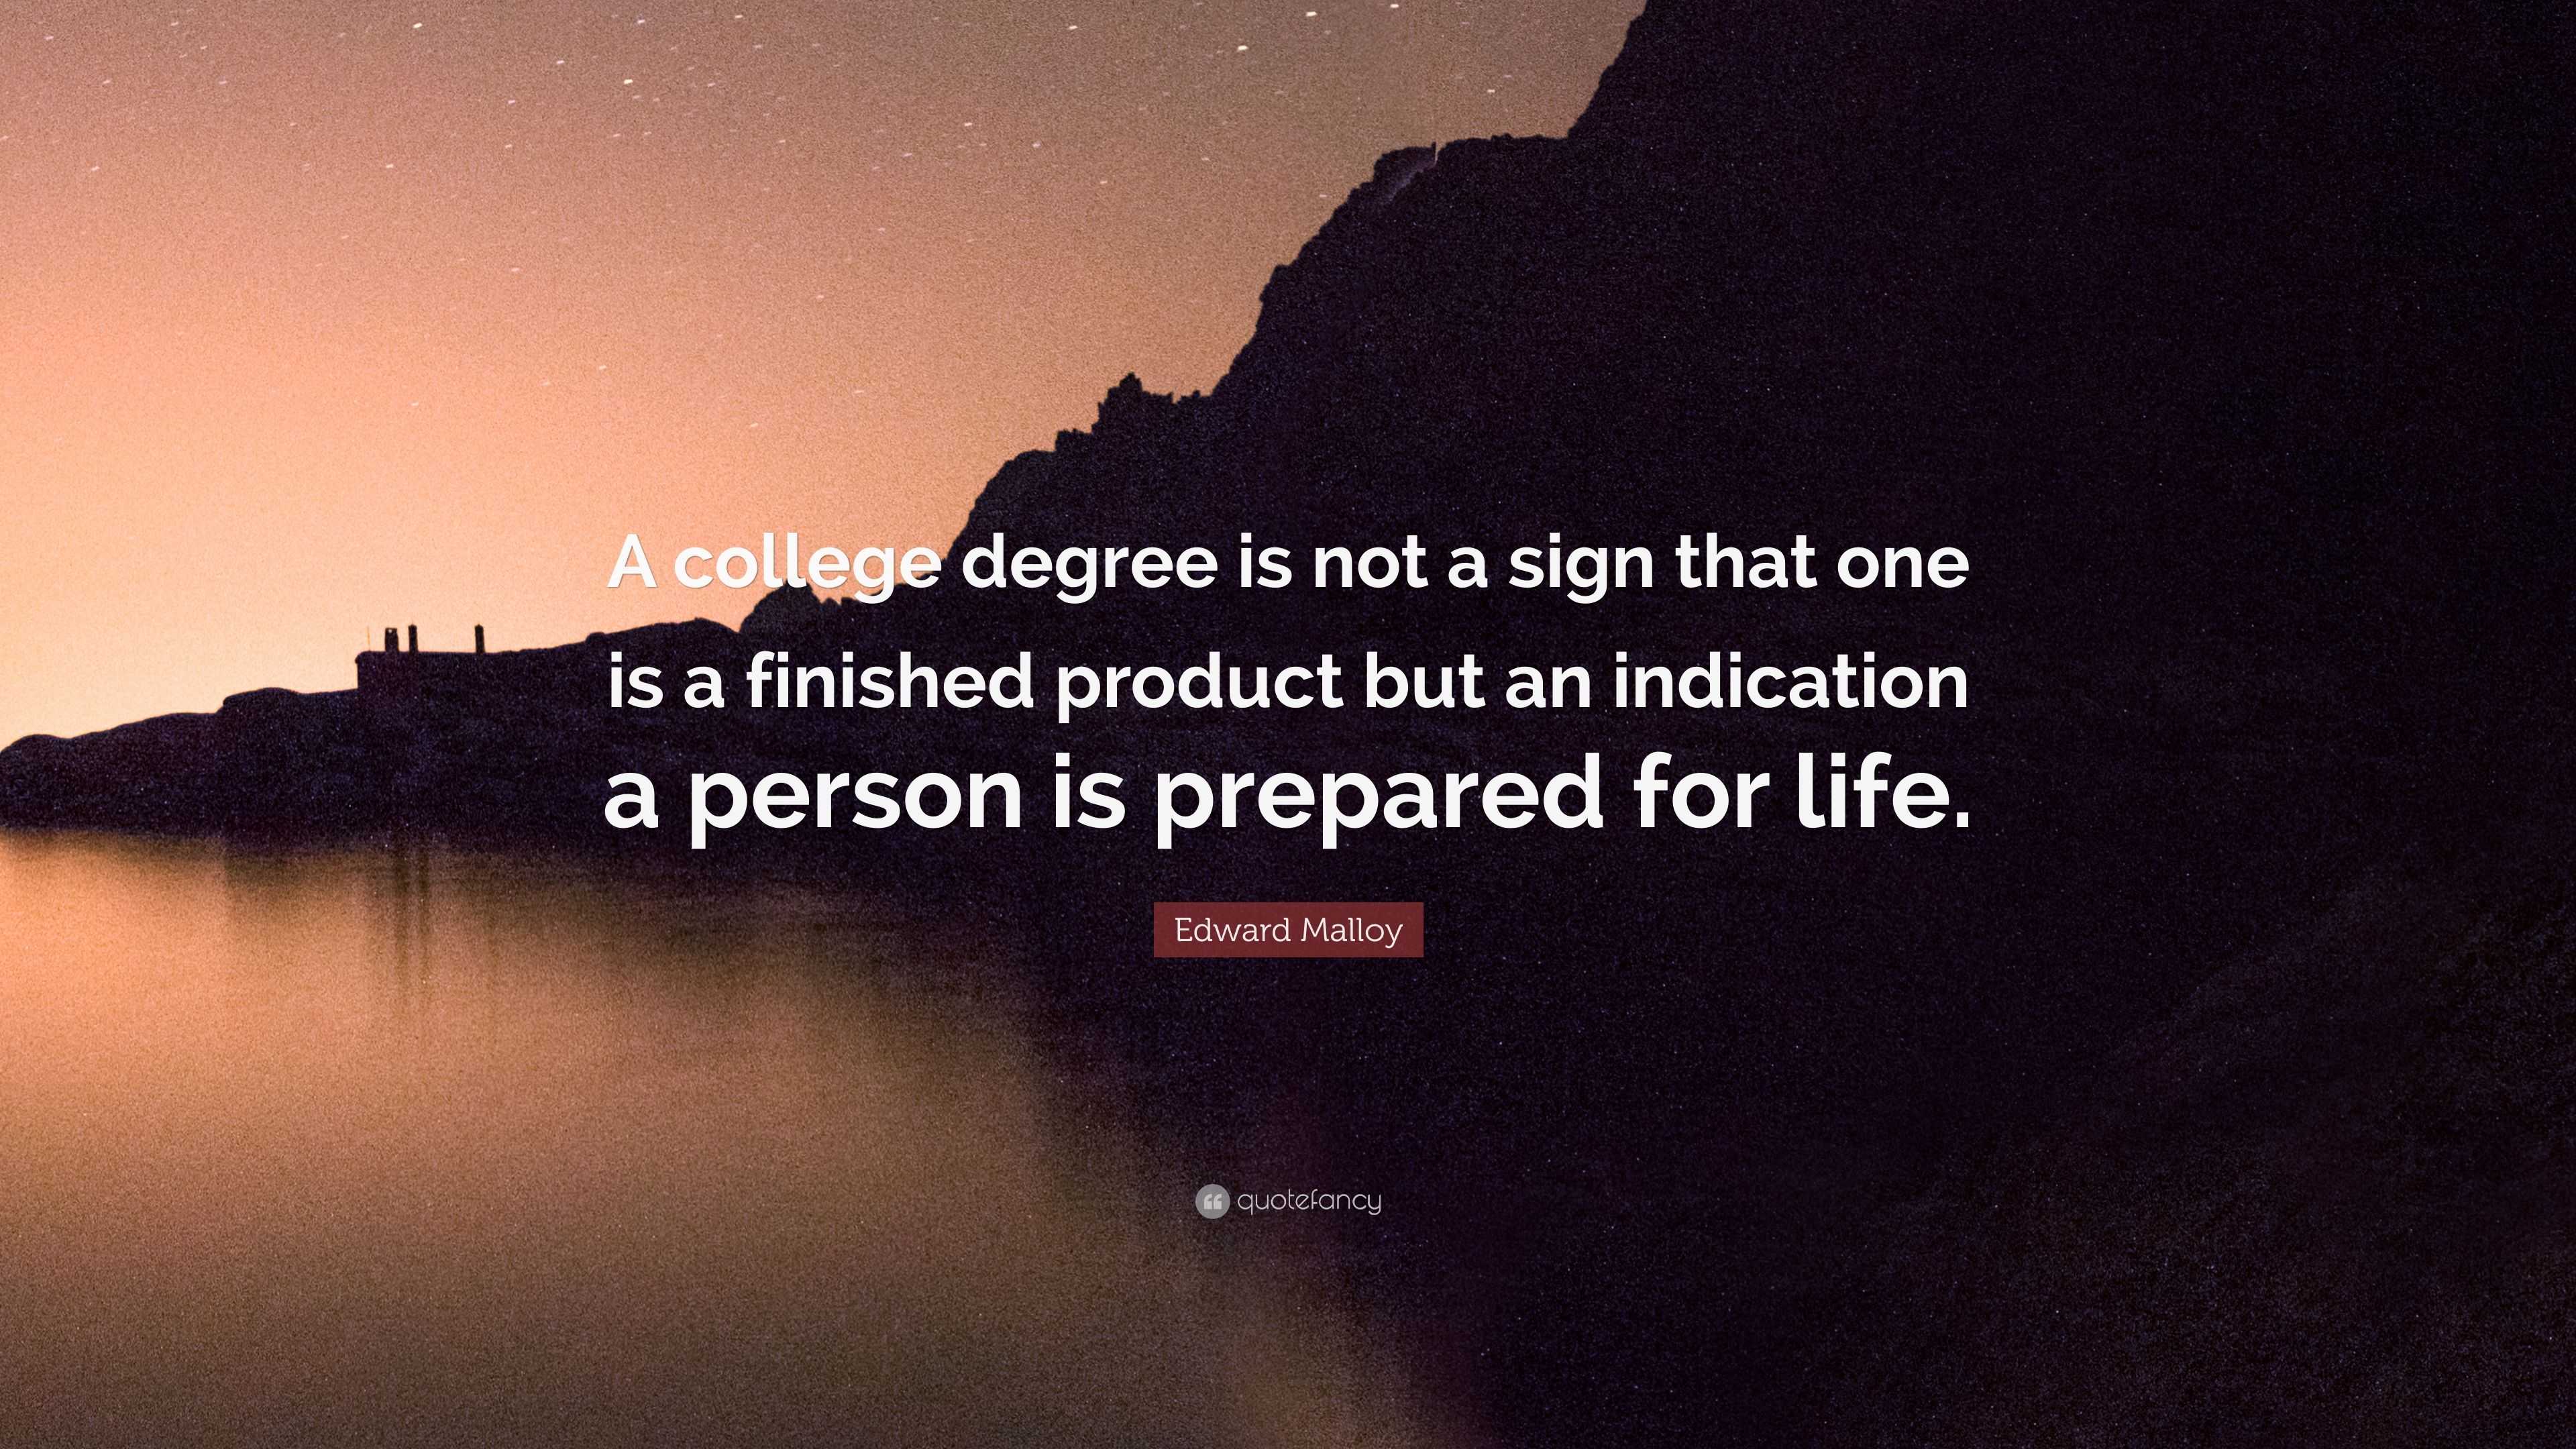 Edward Malloy Quote: “A college degree is not a sign that one is a